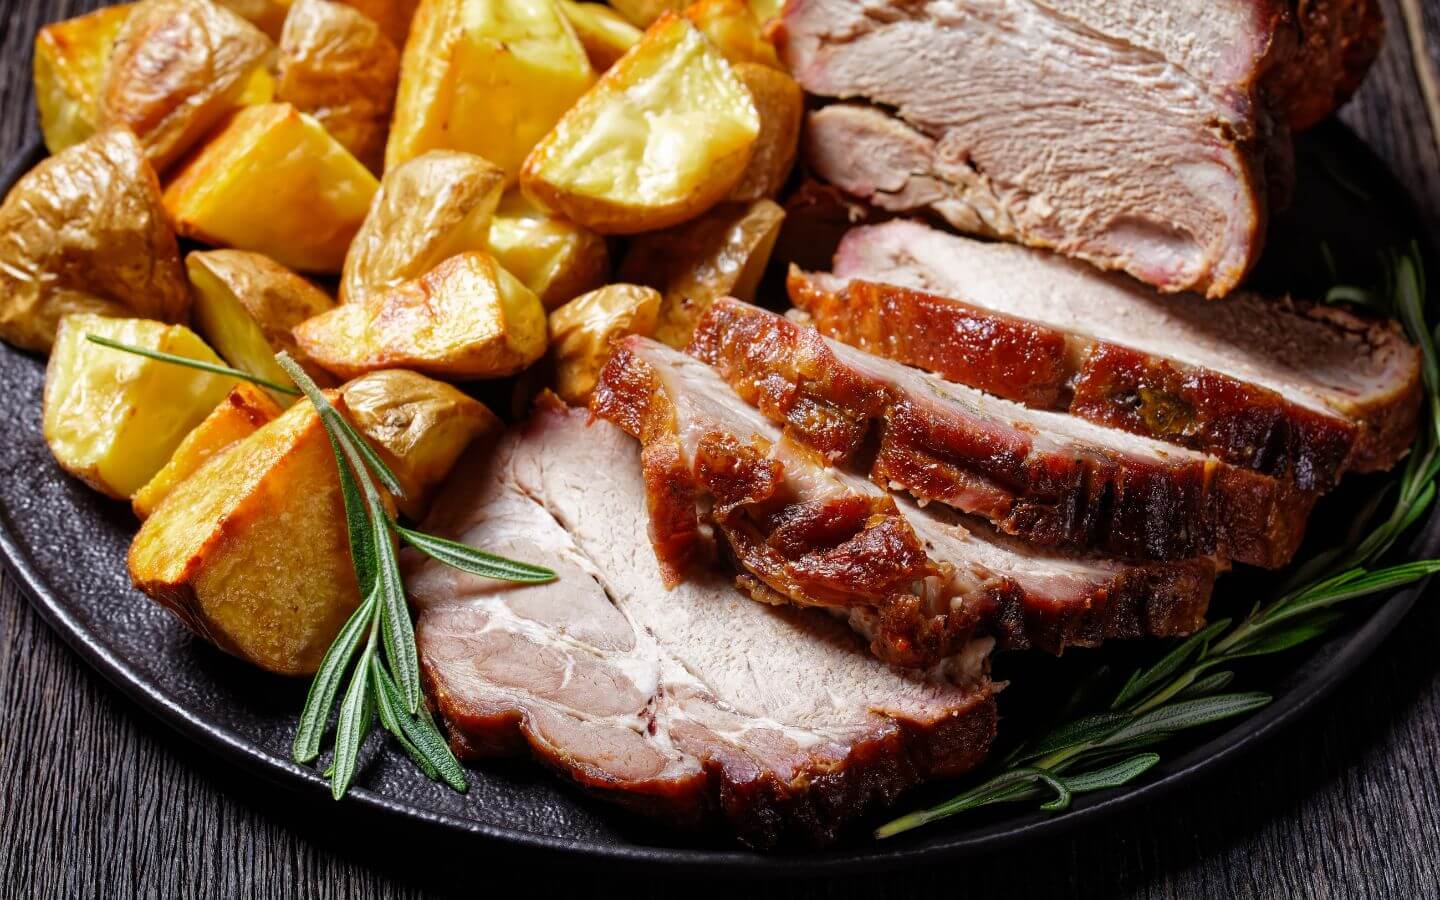 Roast pork with crackling and potatoes